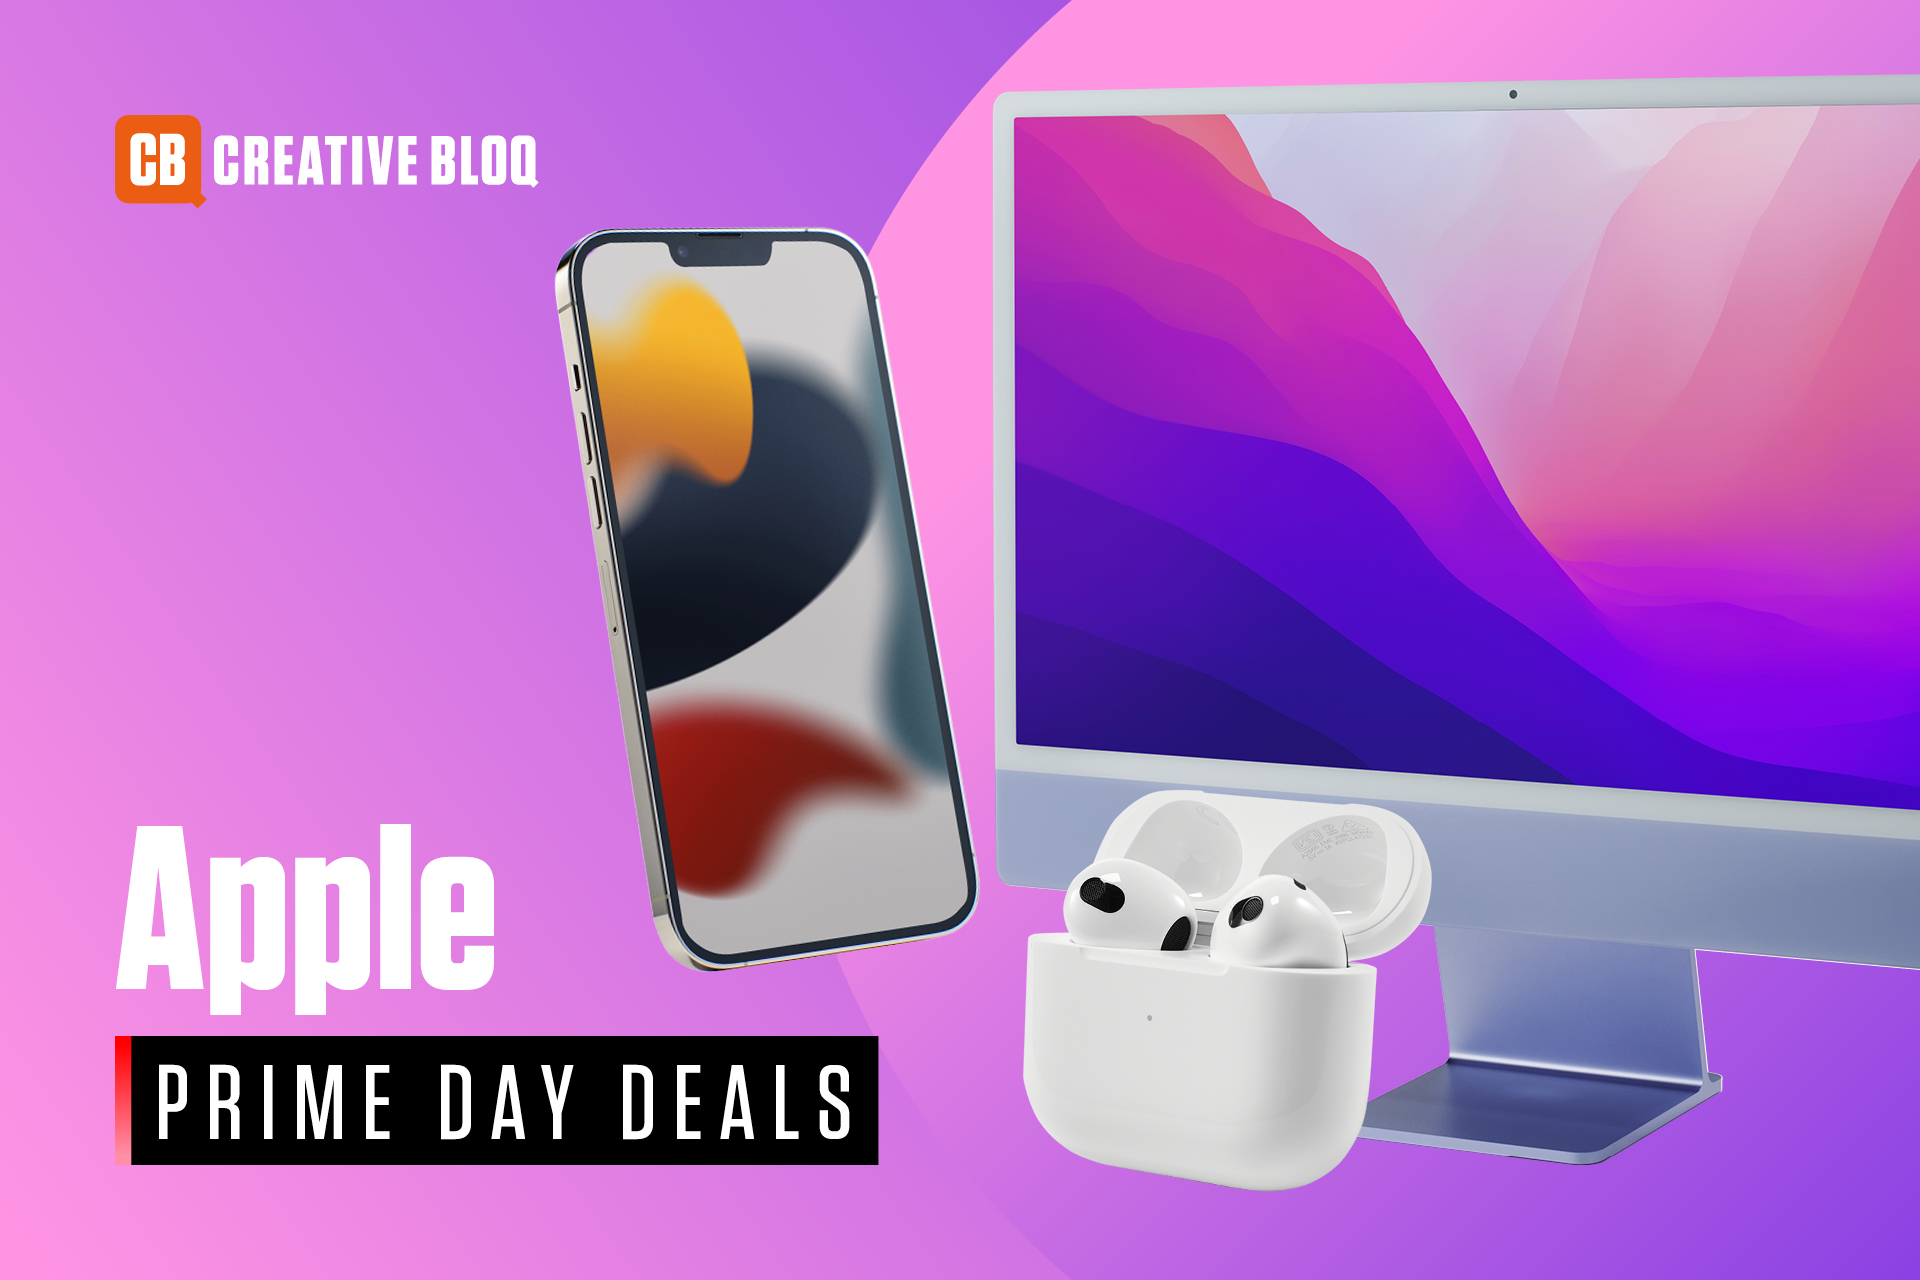 It's  Prime Day! Score deals today on Apple products